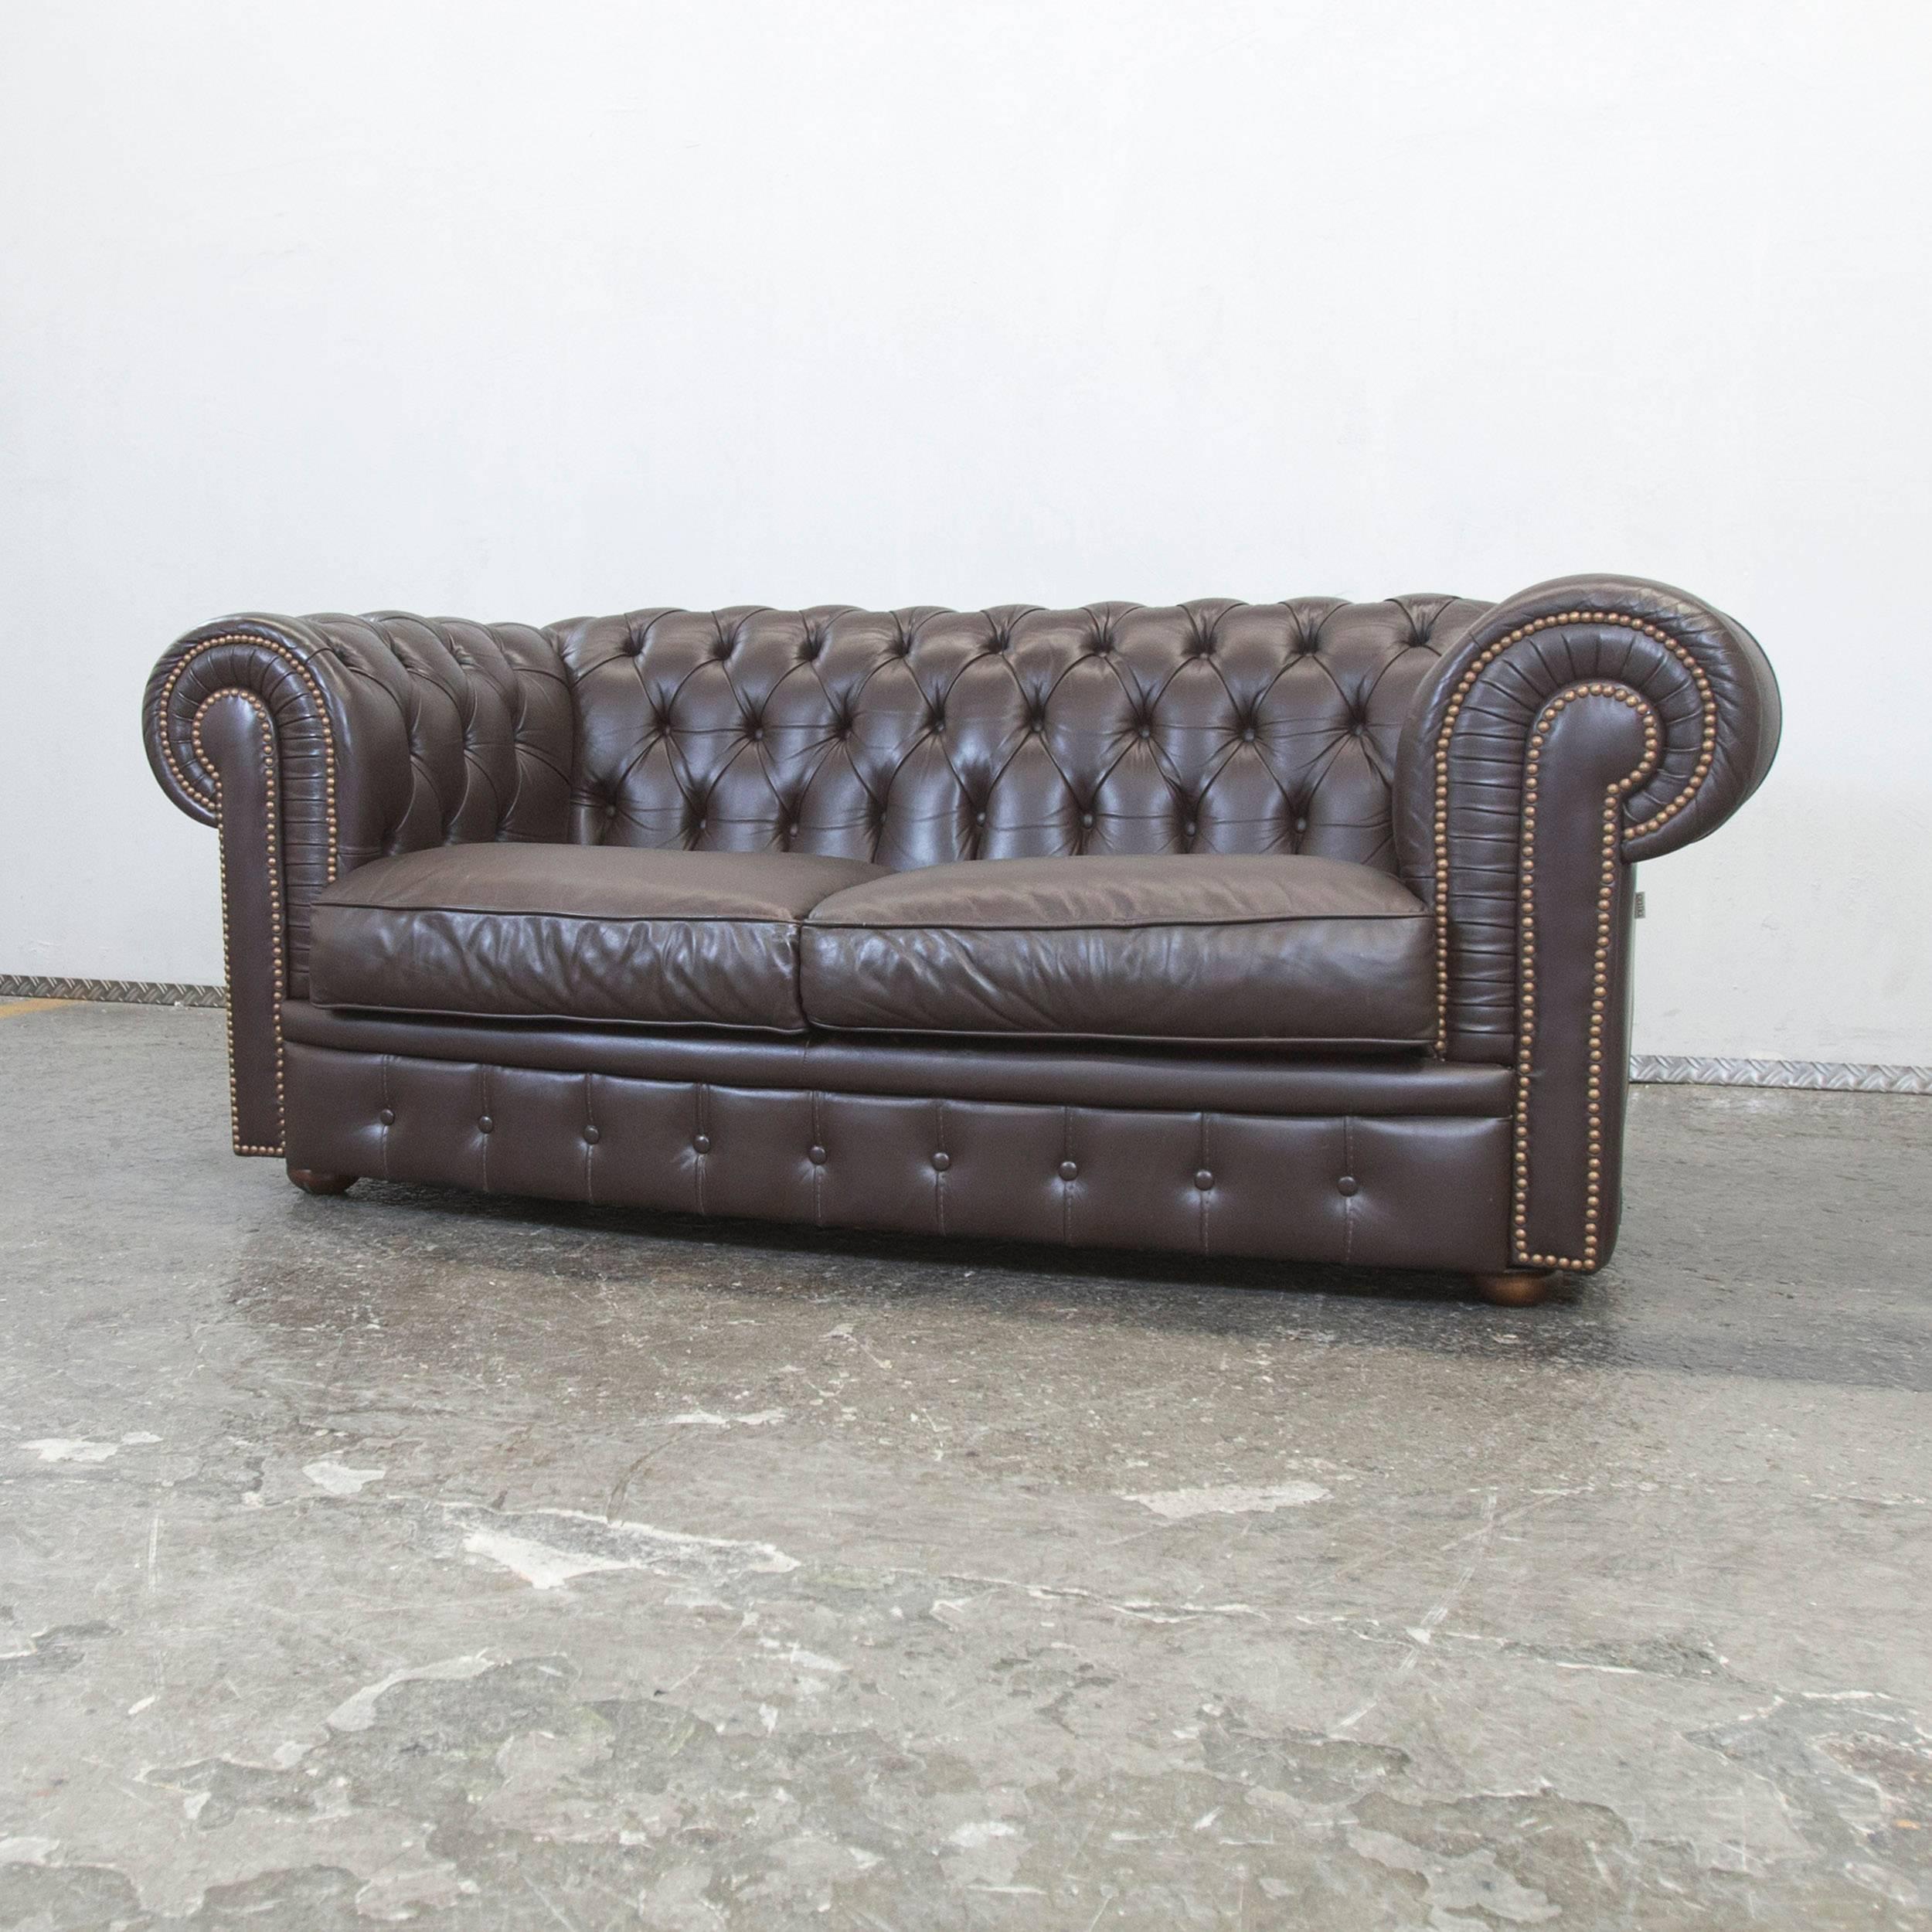 Elegant brown colored Chesterfield sofa from Calia, with a vintage style, designed for pure luxurious comfort.